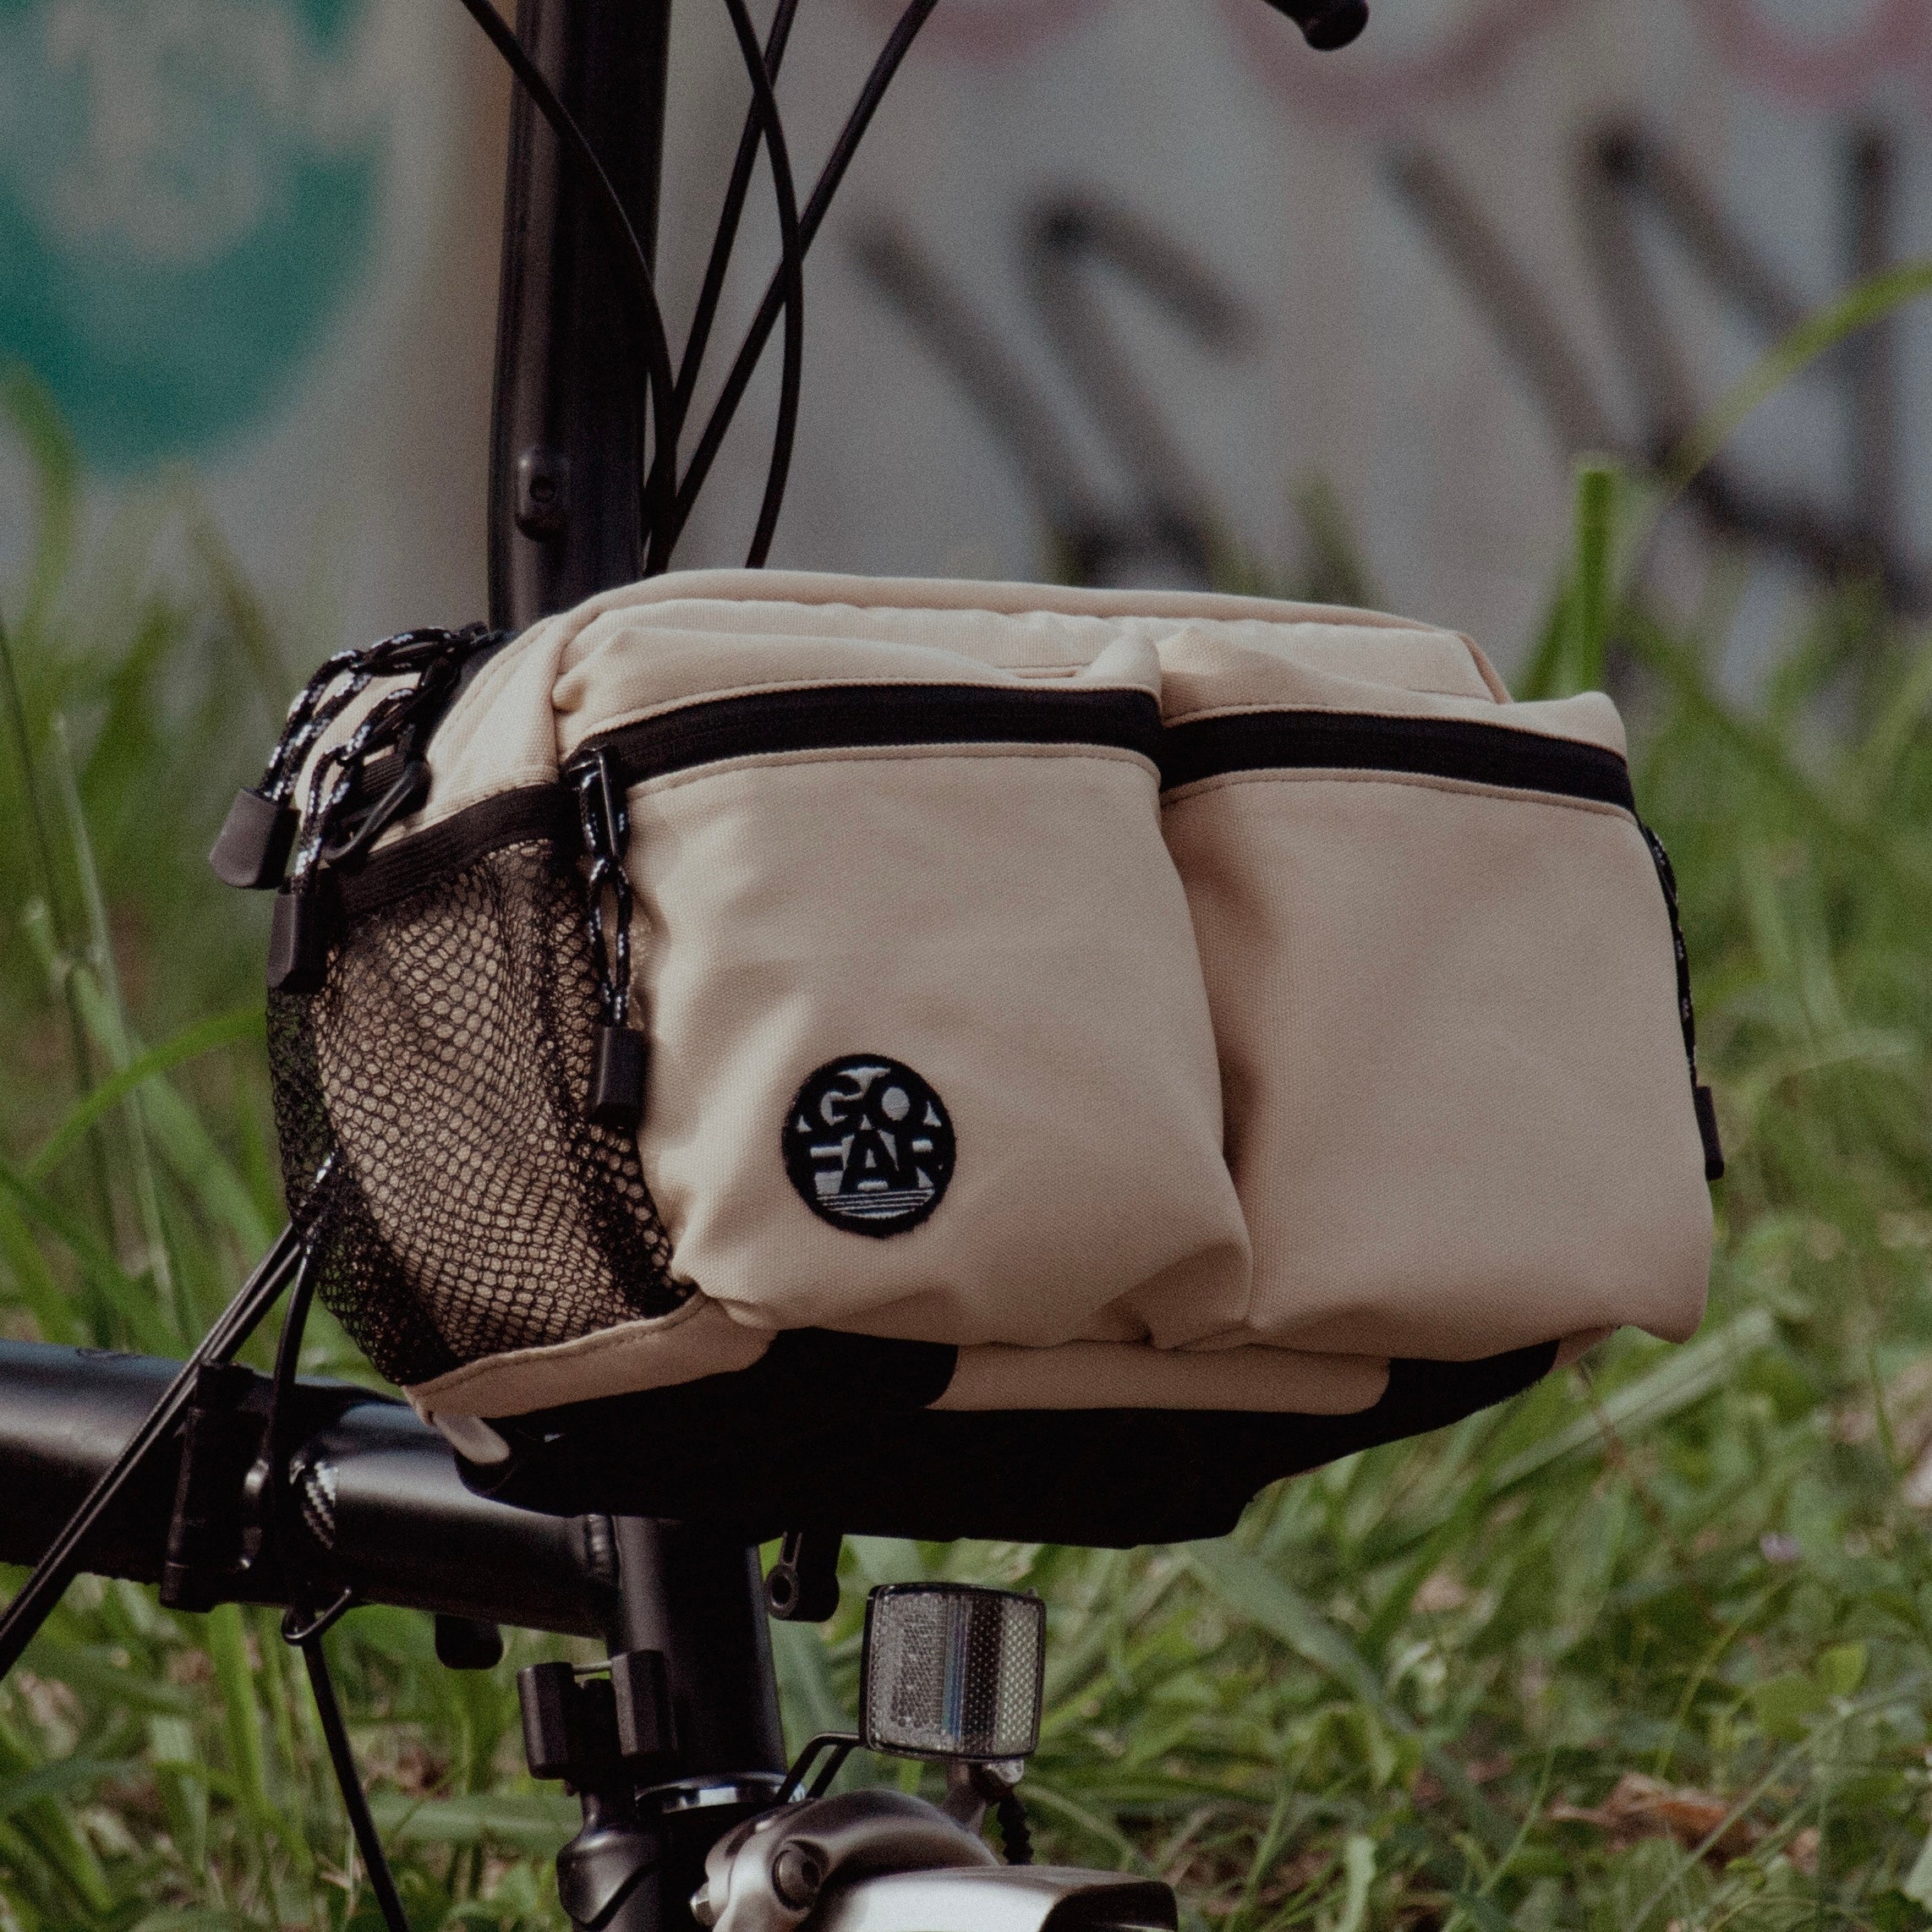 LIMITED EDITION* GO FAR White X-PAC Bike Bags – Bikeary Bicycle